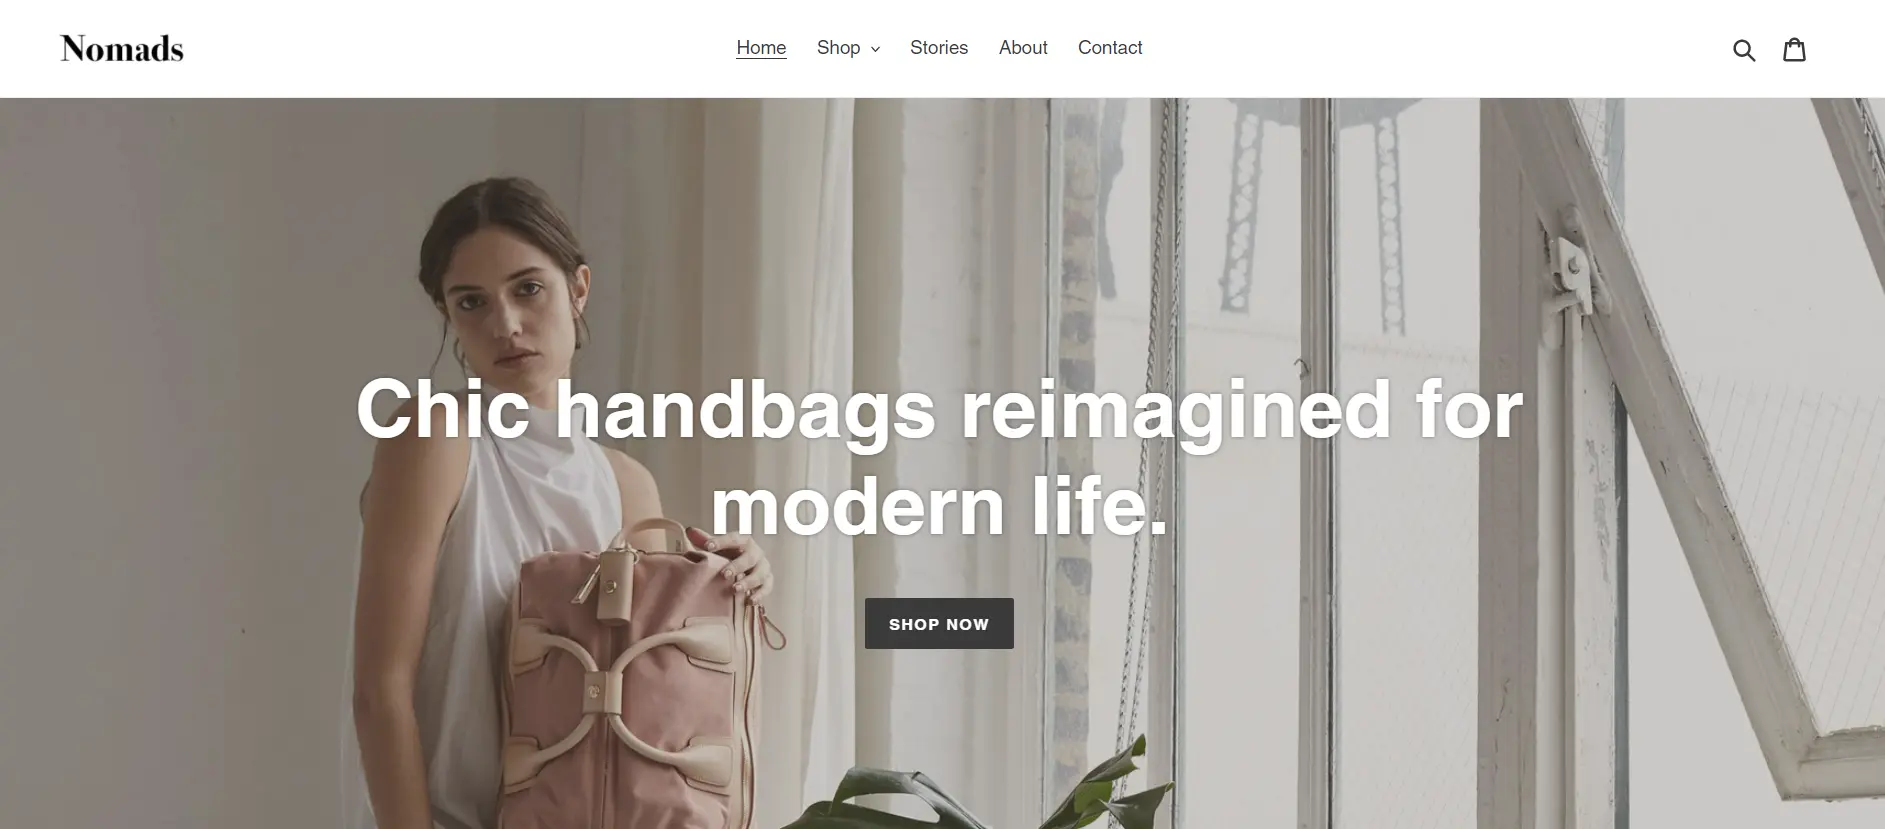 single-product-shopify-themes-8